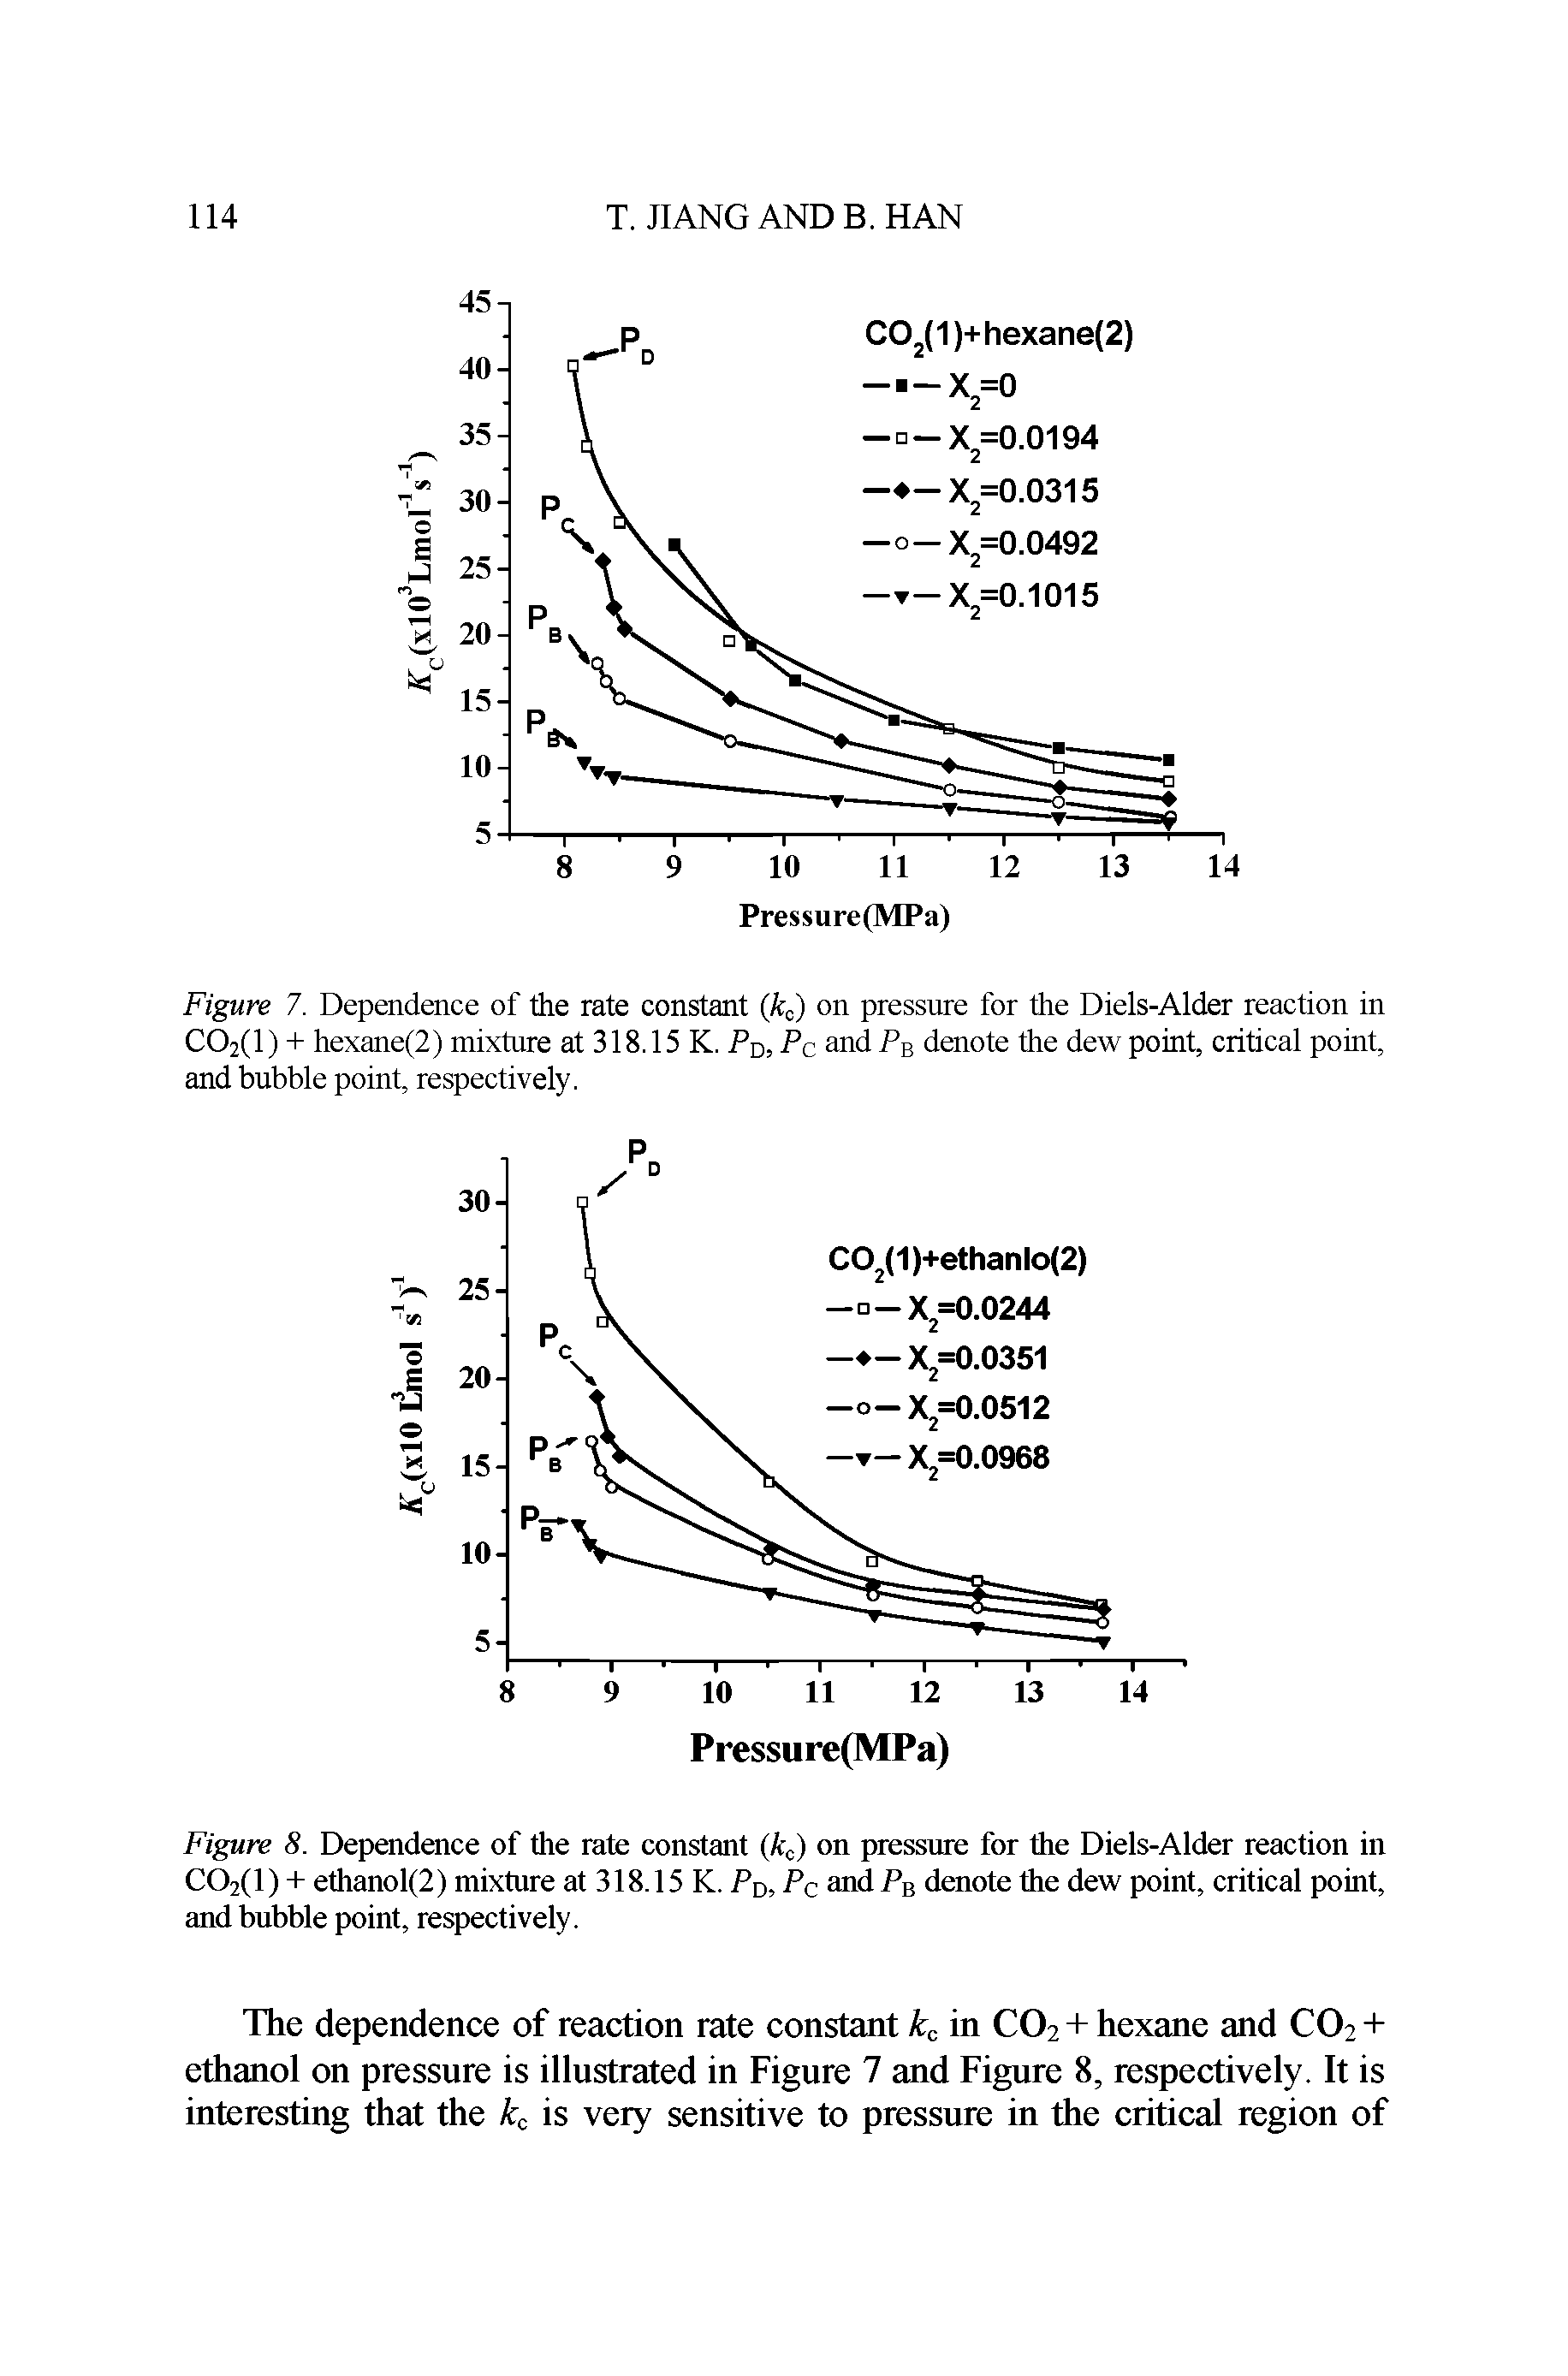 Figure 7. Dependence of the rate constant (k ) on pressure for the Diels-Alder reaction in CO2(1) + hexane(2) mixture at 318.15 K. P-o, Pc and P denote tlie dew point, critical point, and bubble point, respectively.